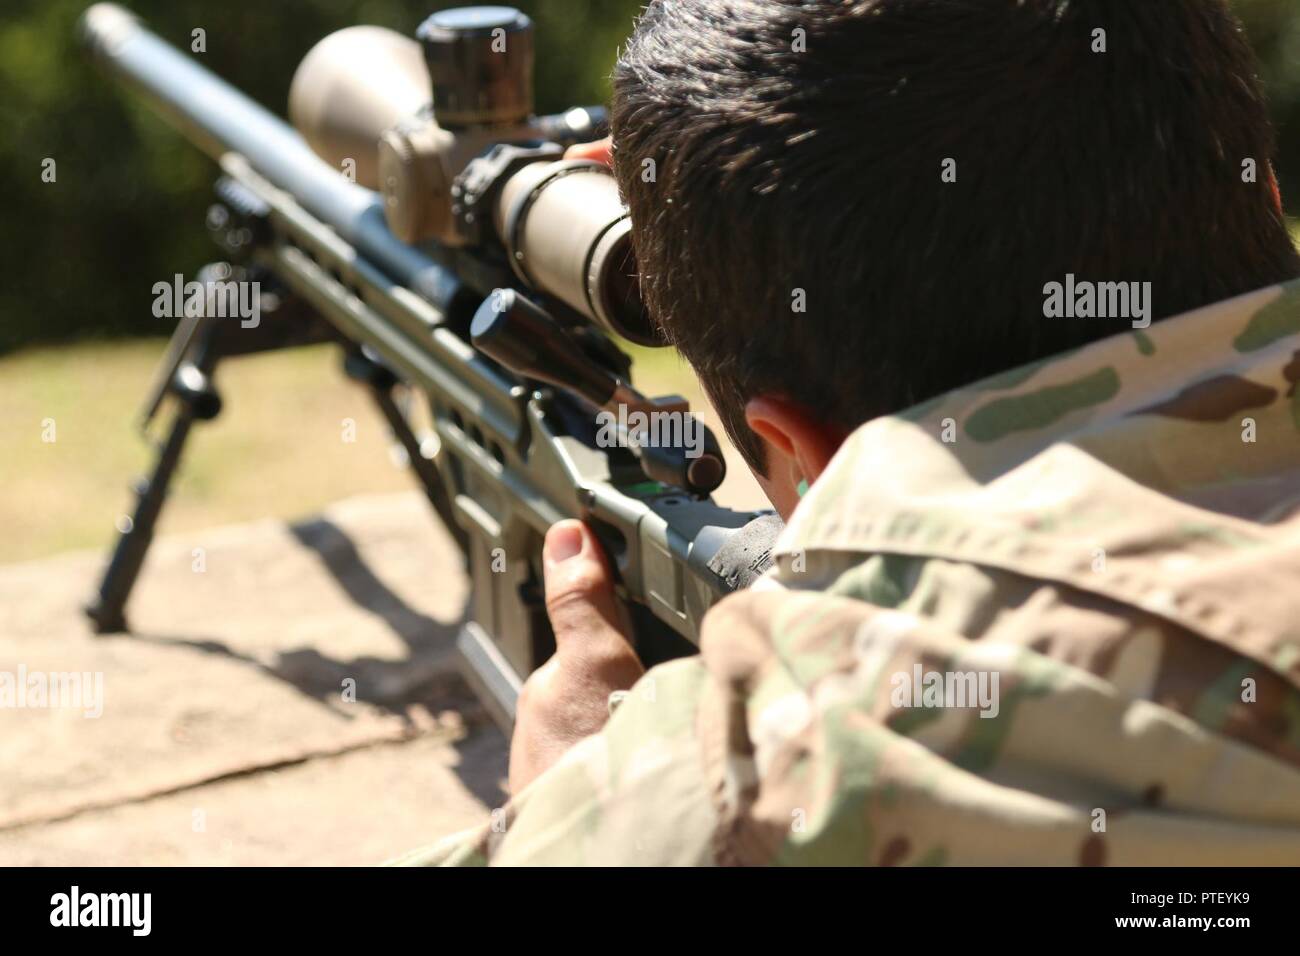 https://c8.alamy.com/comp/PTEYK9/a-us-army-special-forces-soldier-who-is-part-of-a-two-man-sniper-team-fires-down-range-july-19-2017-in-paraguari-paraguay-the-american-sniper-team-is-competing-in-fuerzas-comando-which-is-a-multinational-competition-aiming-to-develop-advanced-tactical-skills-PTEYK9.jpg